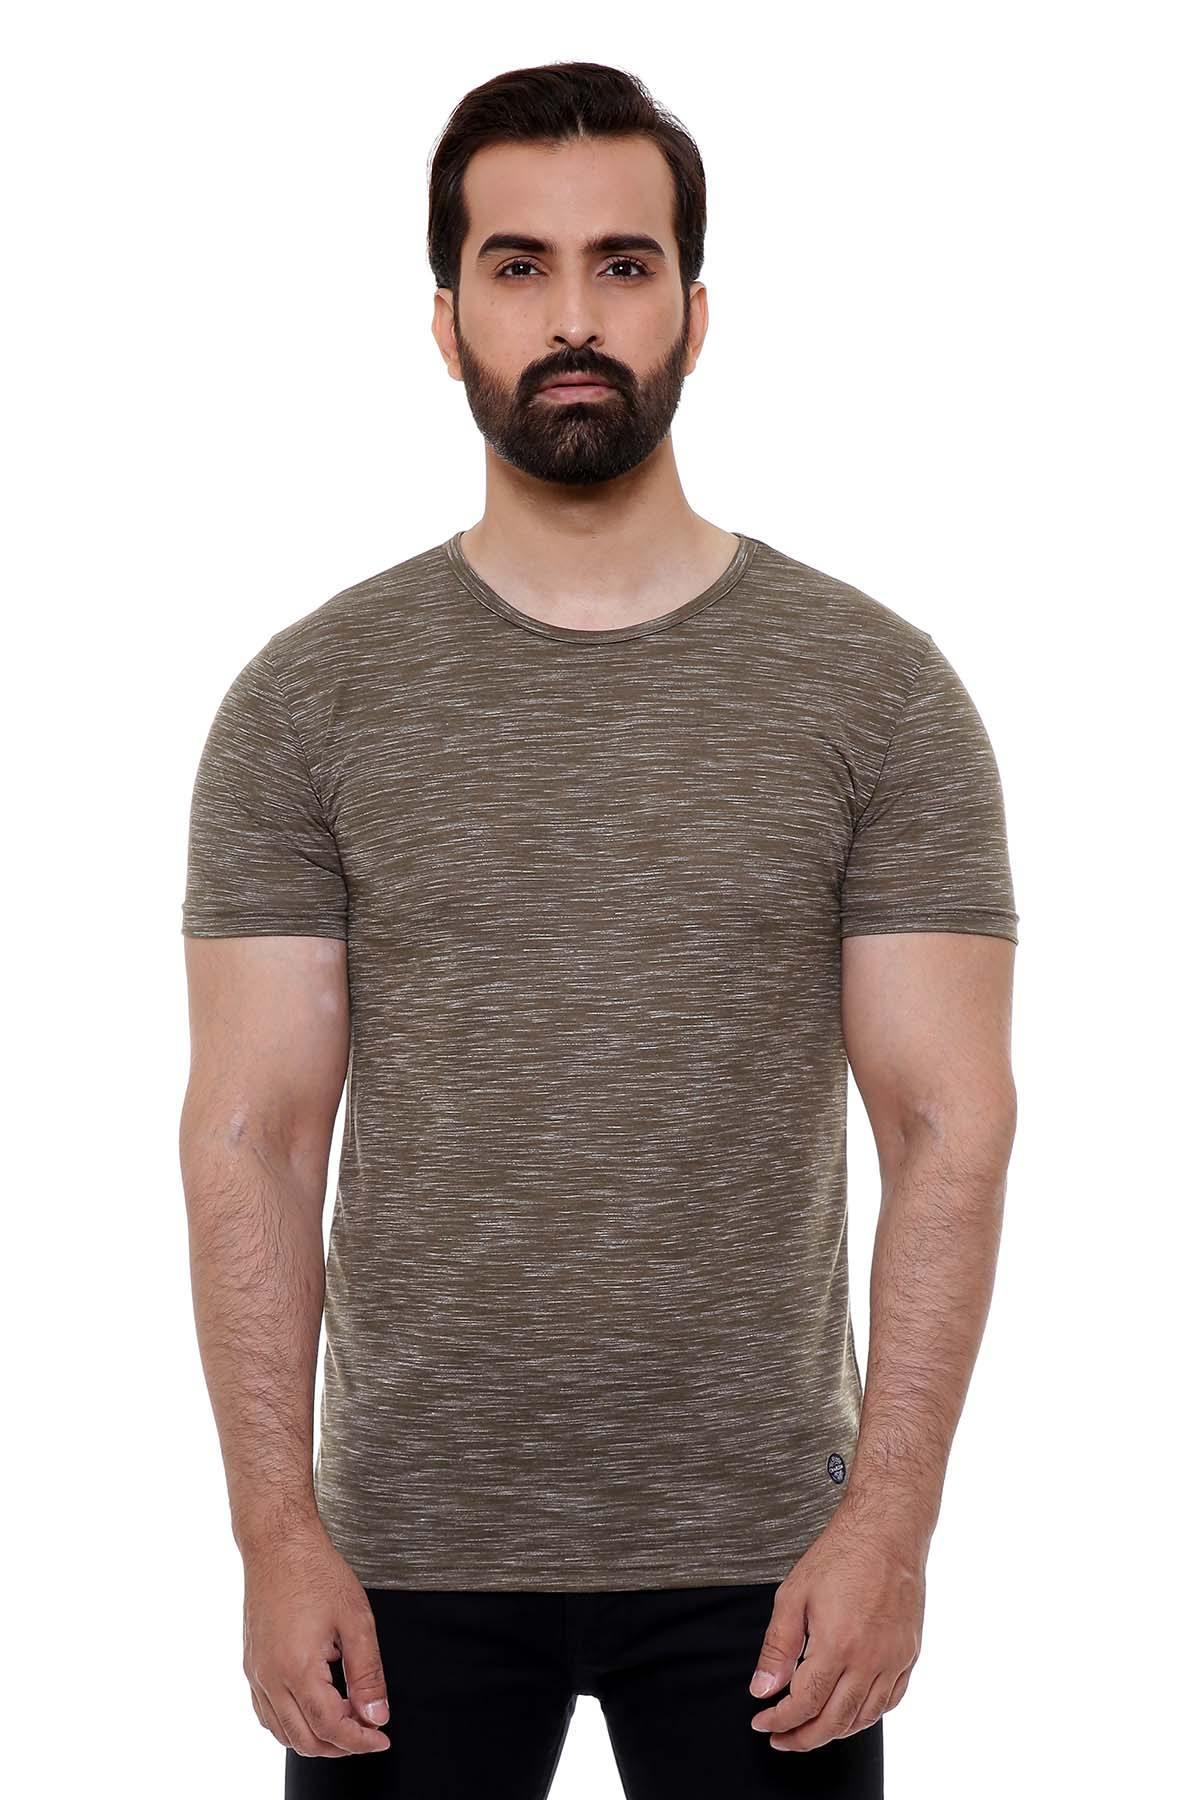 T SHIRT ROUND NECK GREEN at Charcoal Clothing